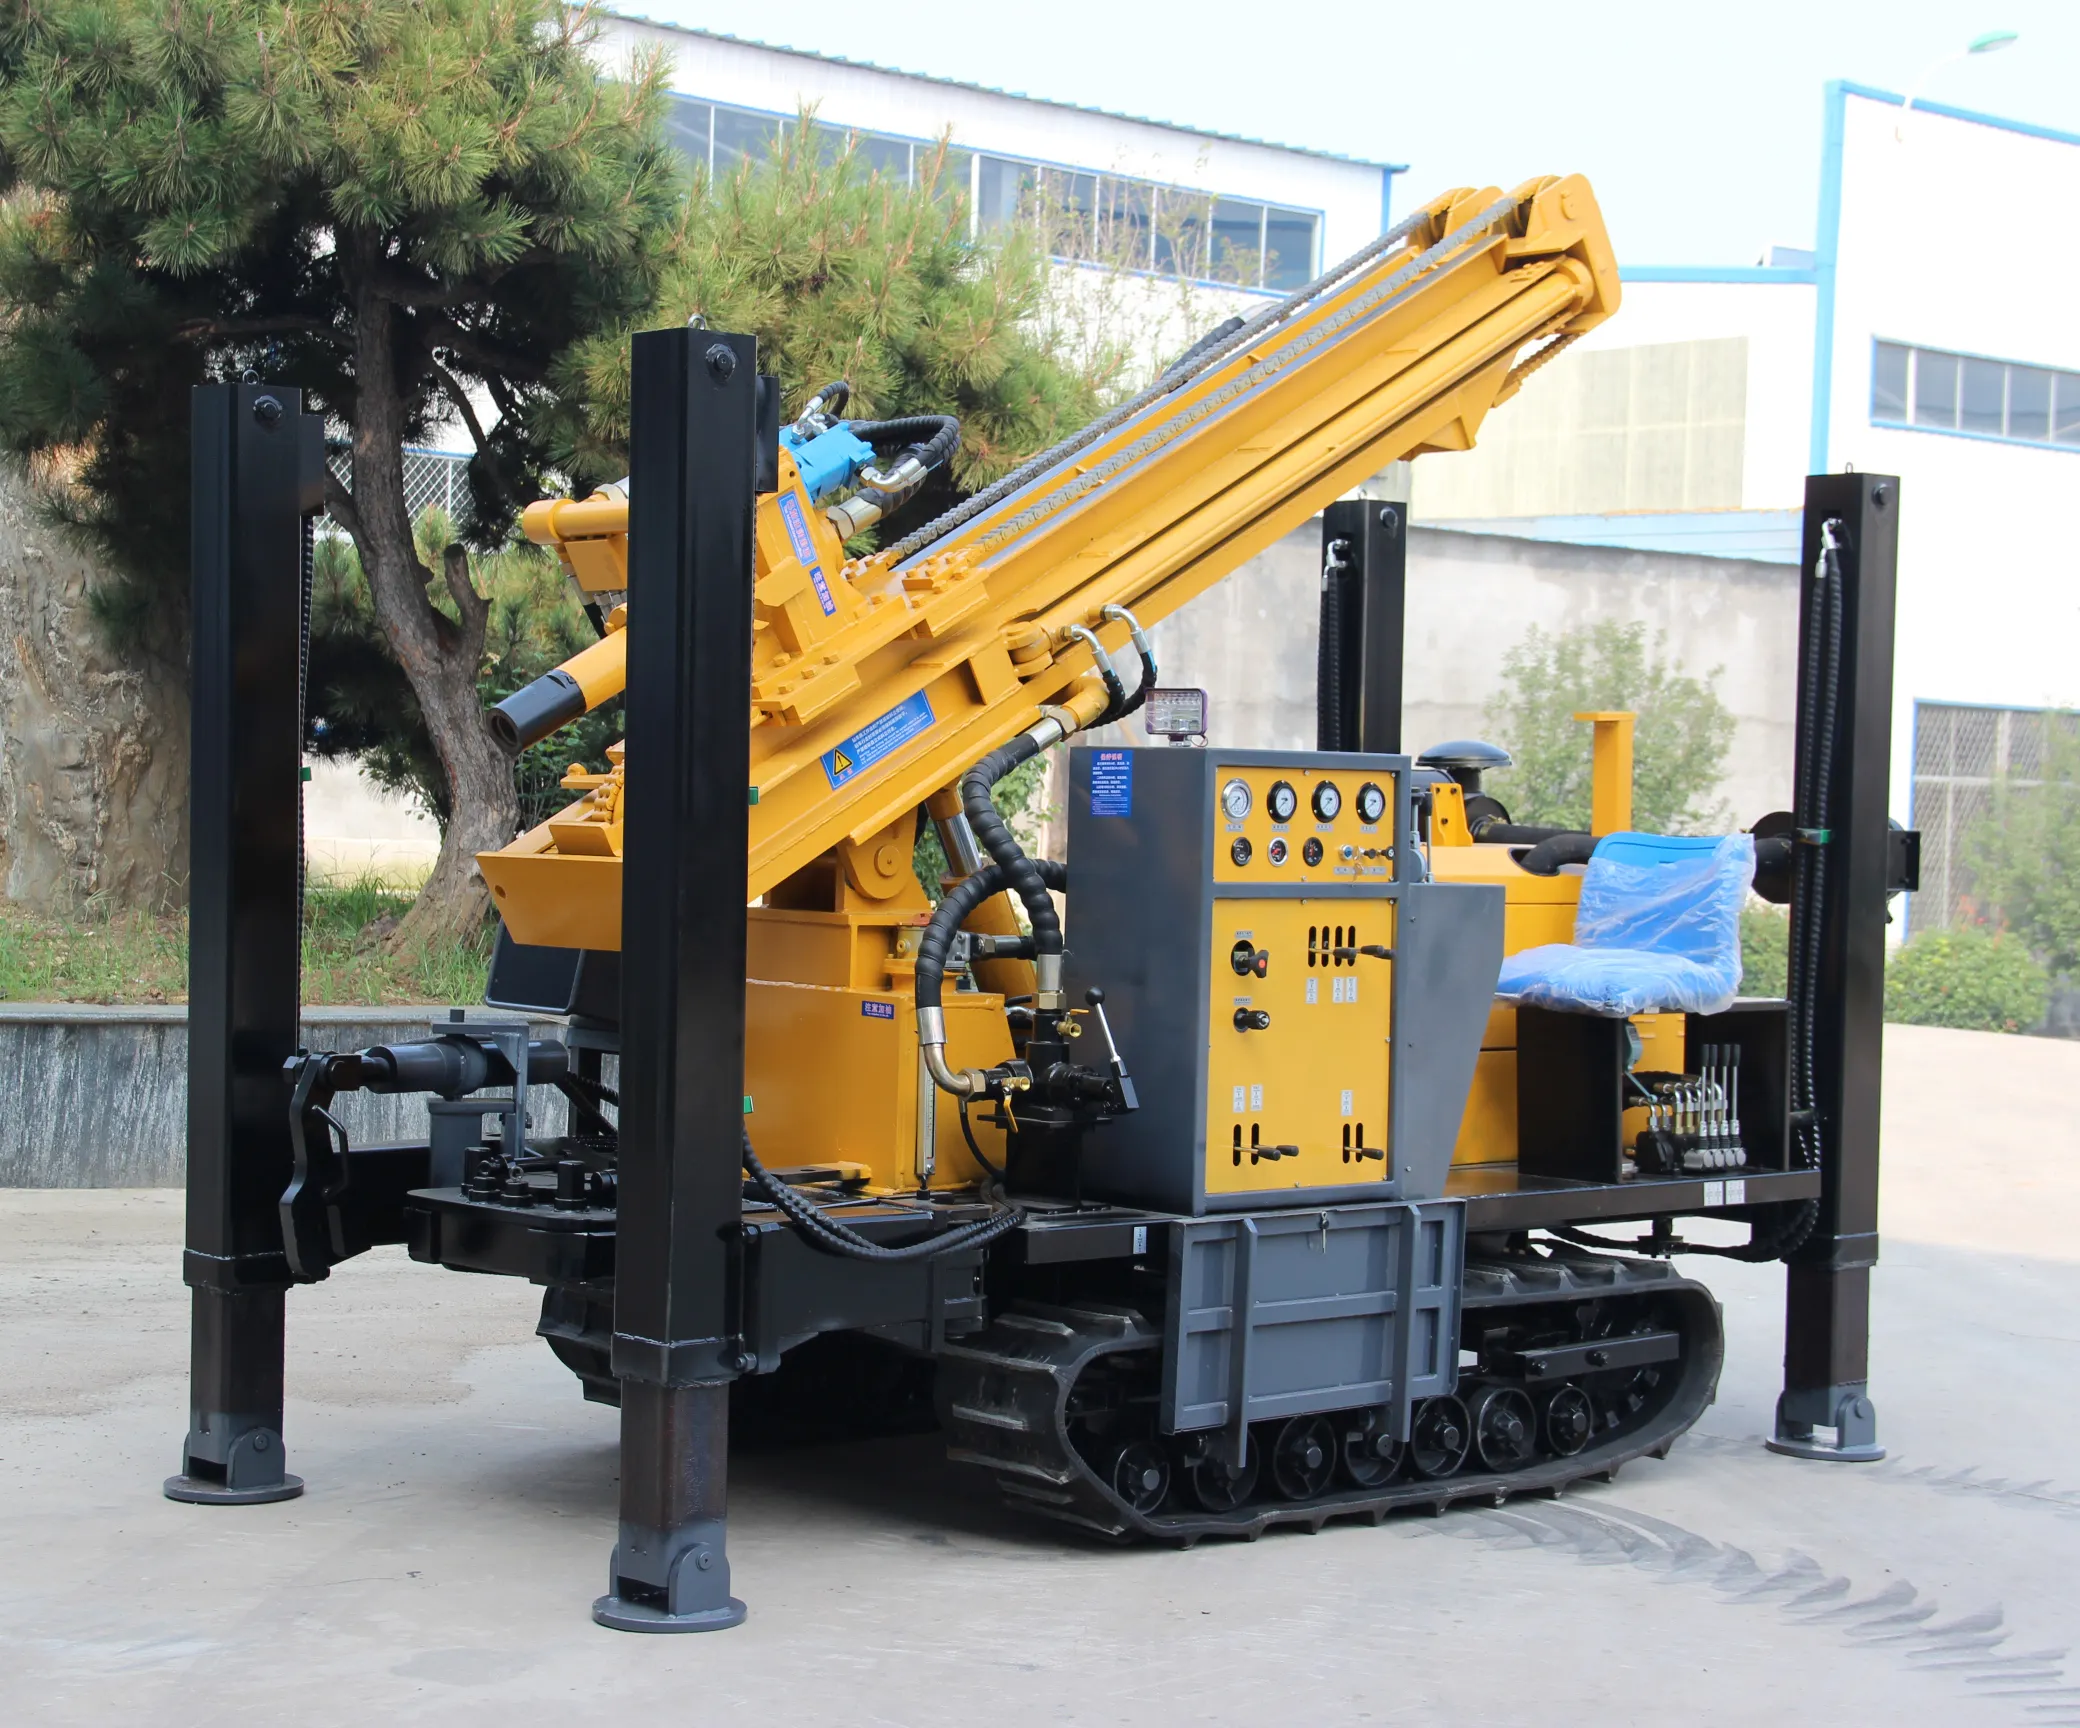 200m Trailer Mounted Water Well Drilling Rig water well drilling rig machine Oilfield Drilling Rig